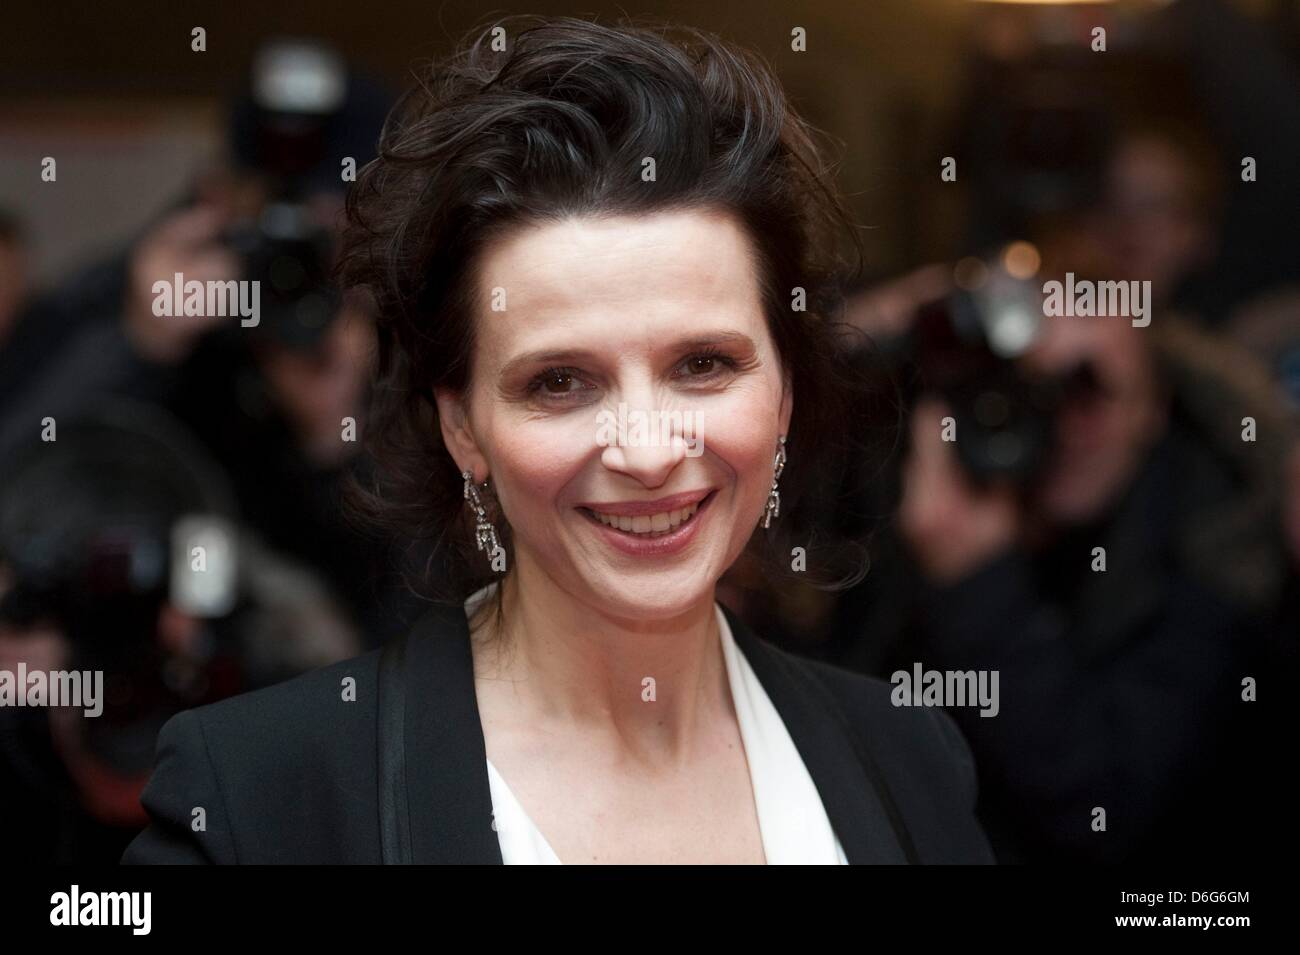 French actress Juliette Binoche arrives for the premiere of the movie 'Elles' during the 62nd Berlin International Film Festival, in Berlin, Germany, 10 February 2012. The movie is presented in the section Panorama Special at the 62nd Berlinale running from 09 to 19 February. Photo: Sebastian Kahnert dpa Stock Photo